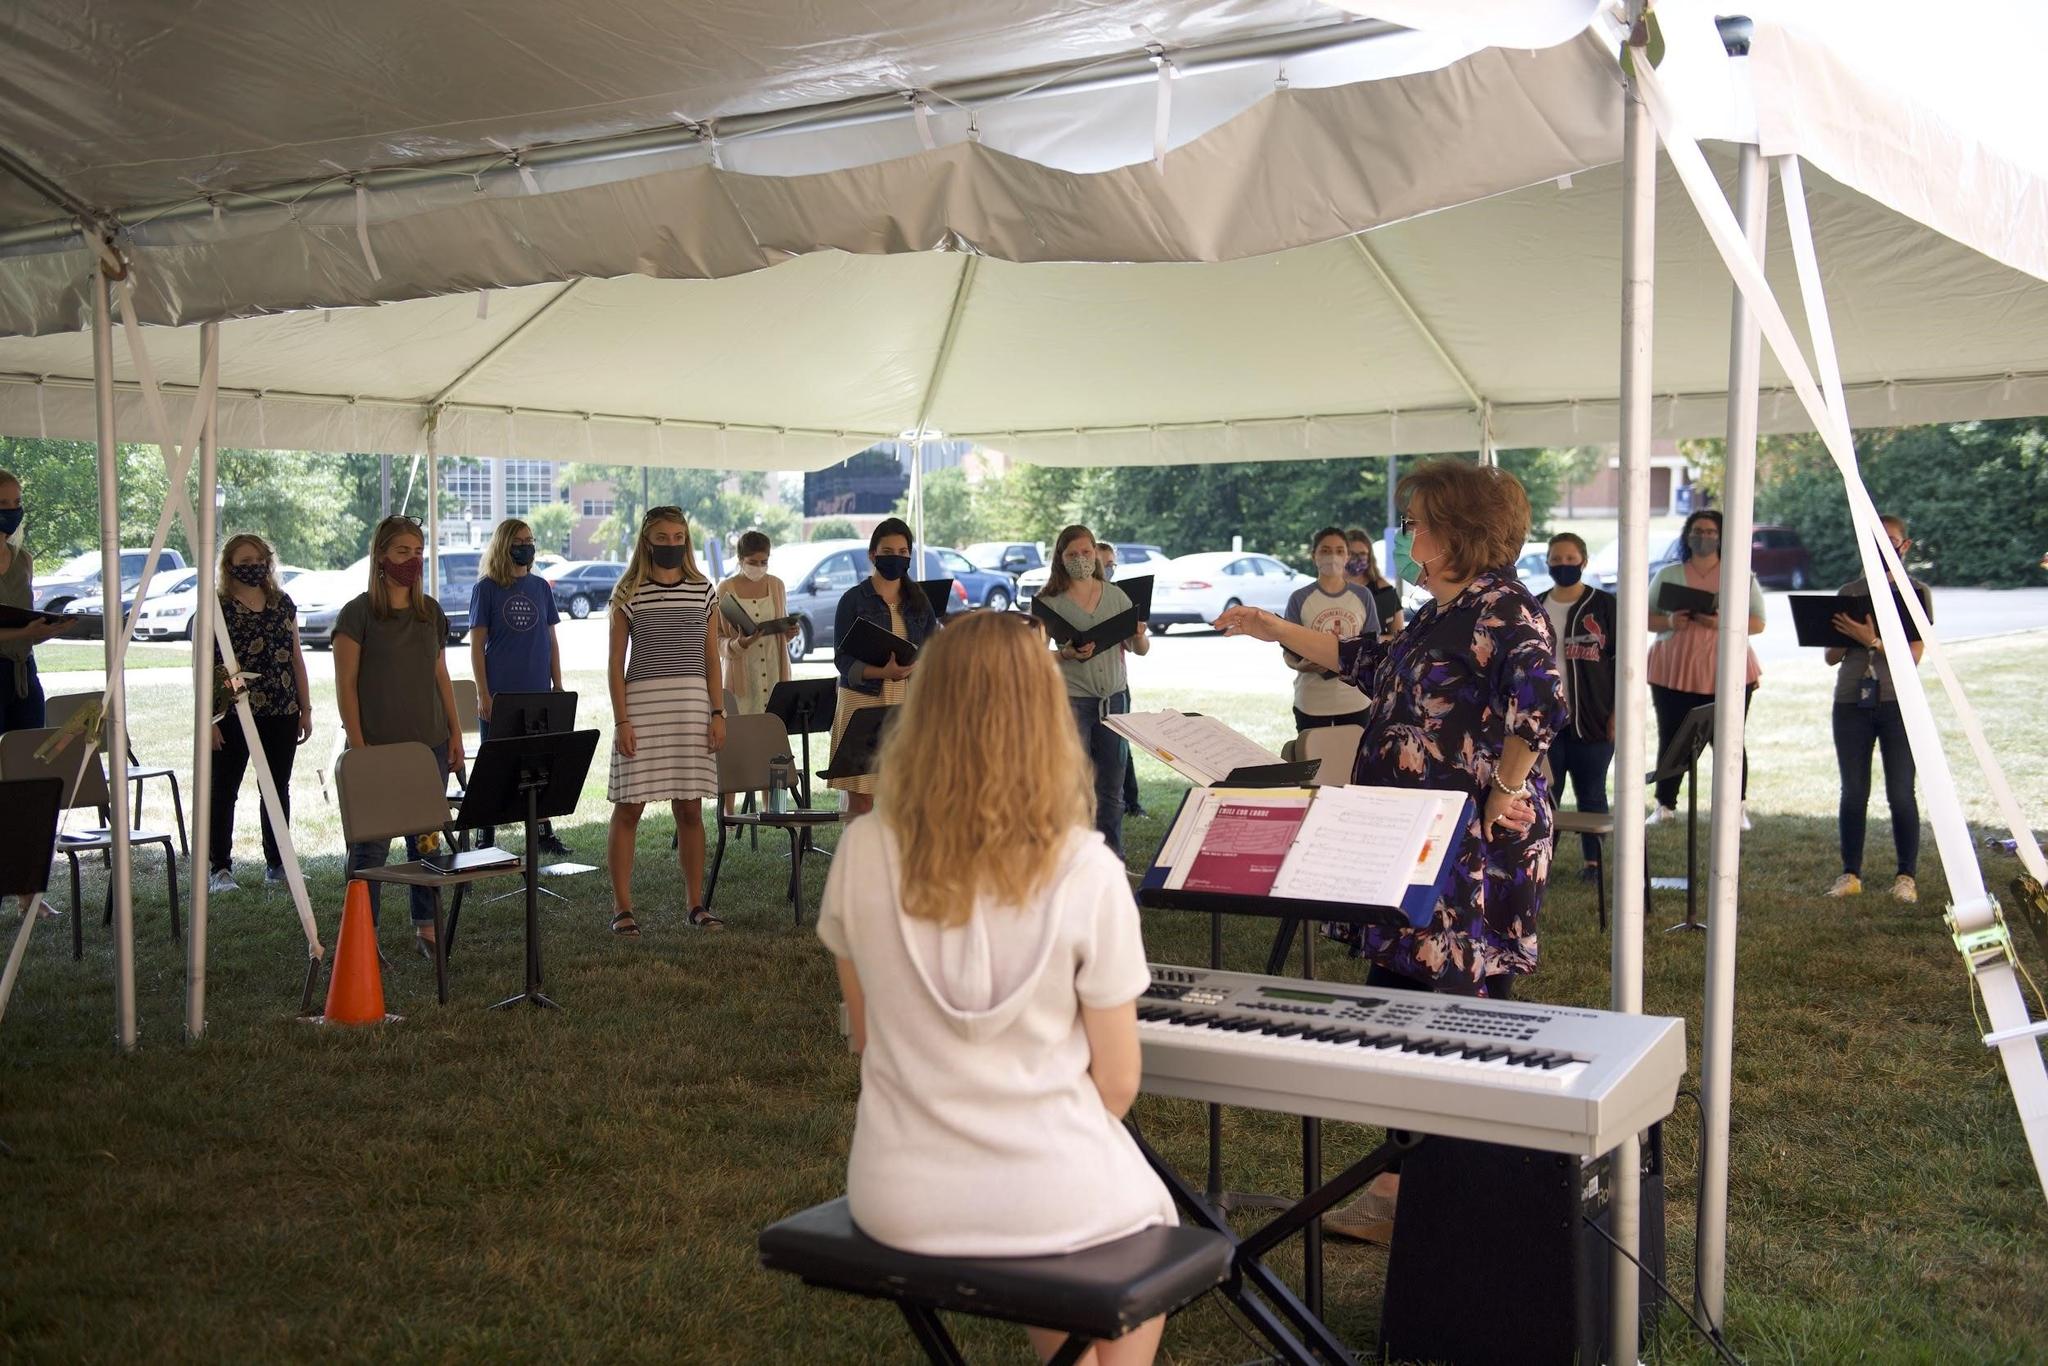 Beth Porter, department chair and associate professor of vocal music, conducts the Women’s choir during an outdoor rehearsal underneath the new tents